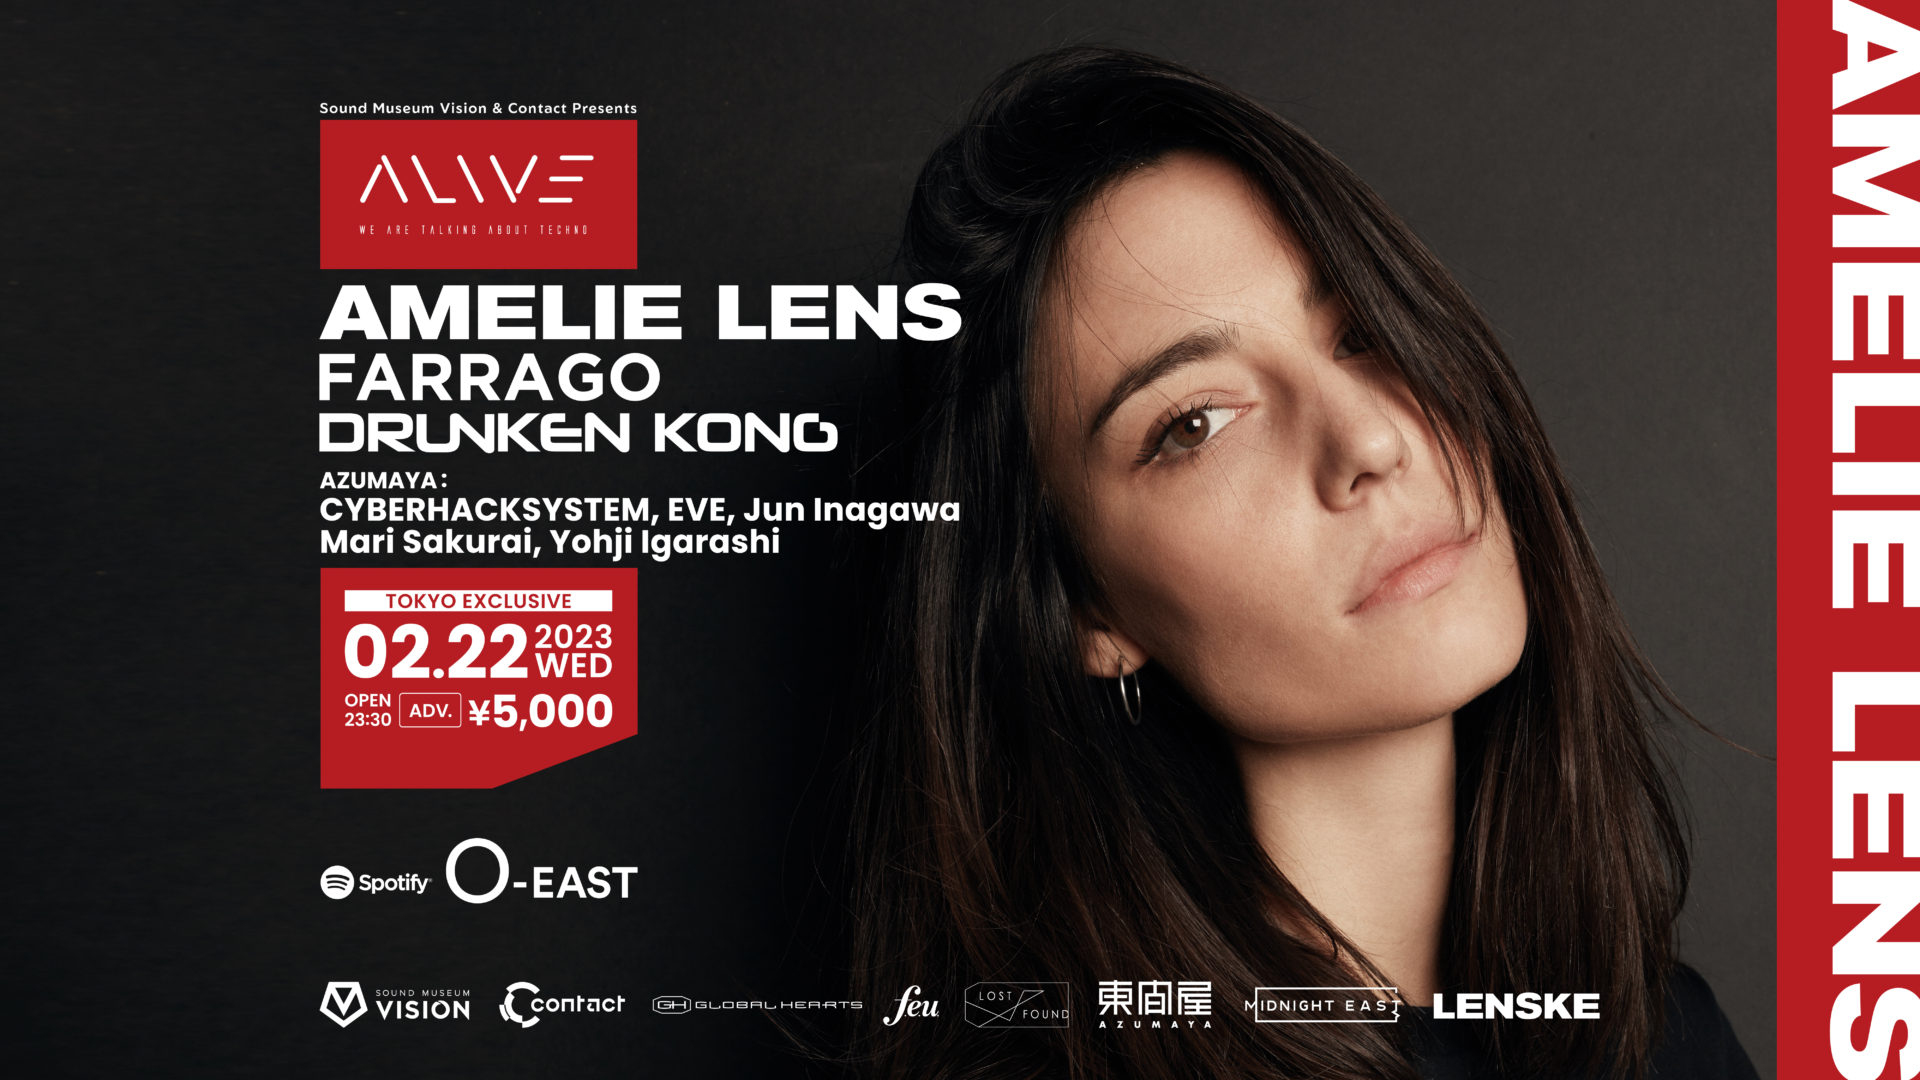 Sound Museum Vision & Contact Present ALIVE – AMELIE LENS – at Spotify O-EAST